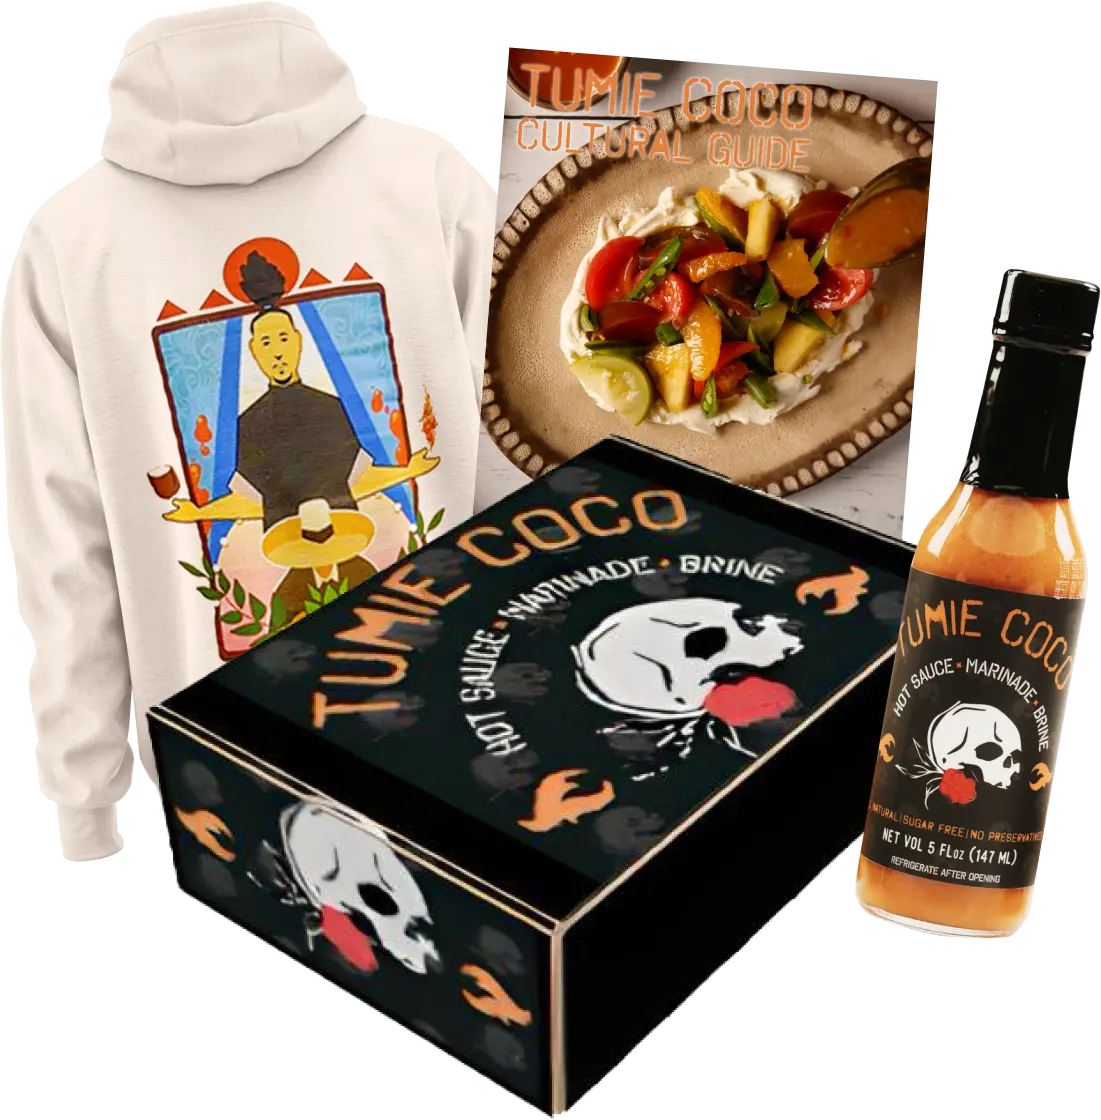 Tumie Coco Gift Box with Hoodie, Cookbook & Hot Sauce